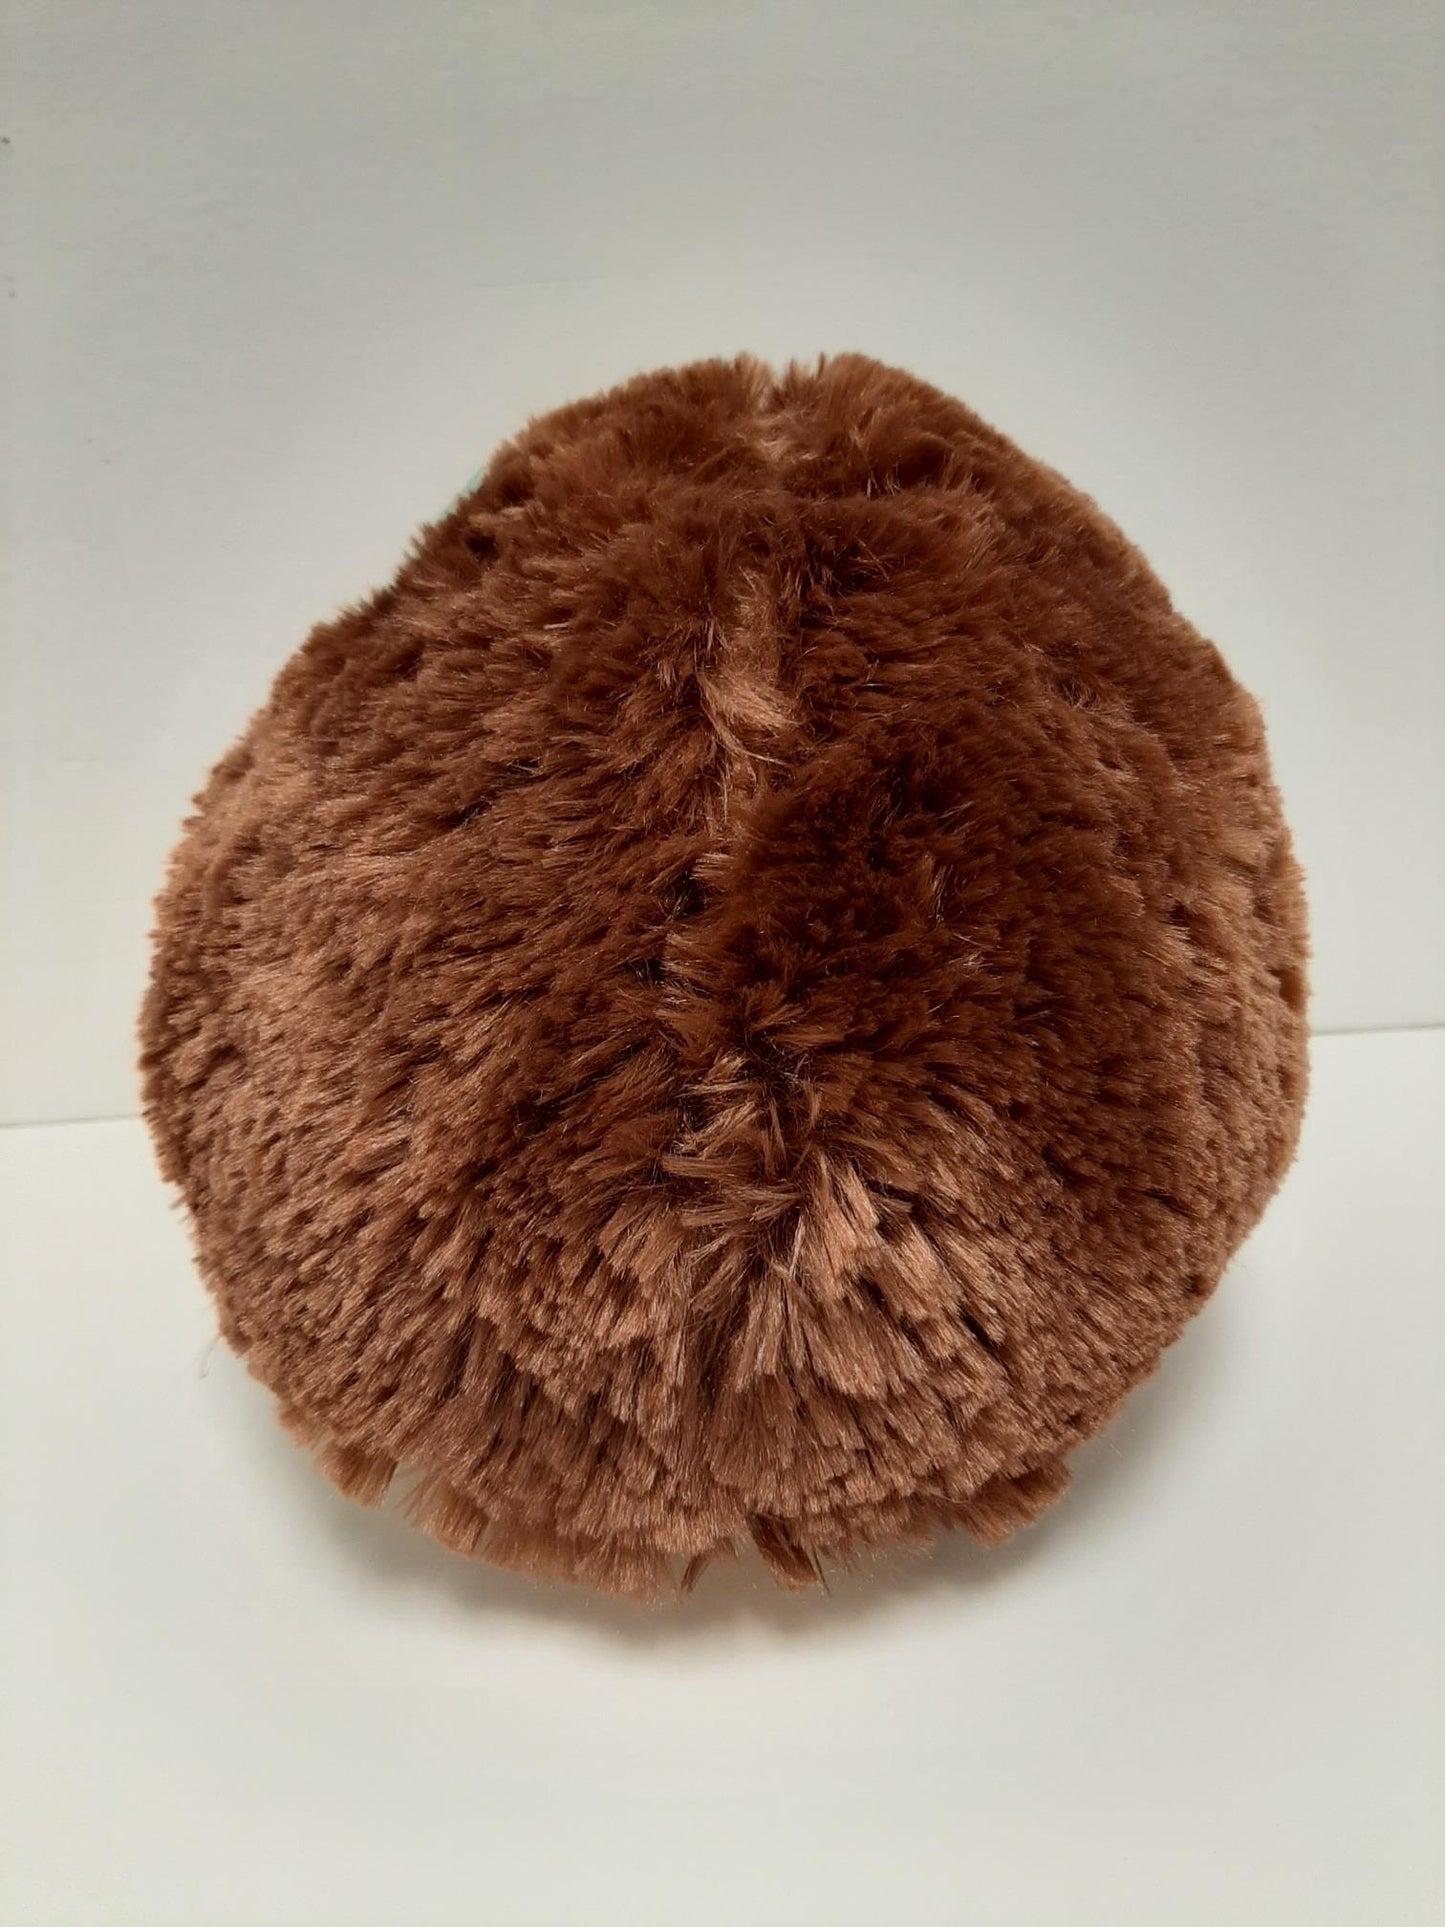 Amuse: Brown Hedgehog with Clover 12.5" Plush